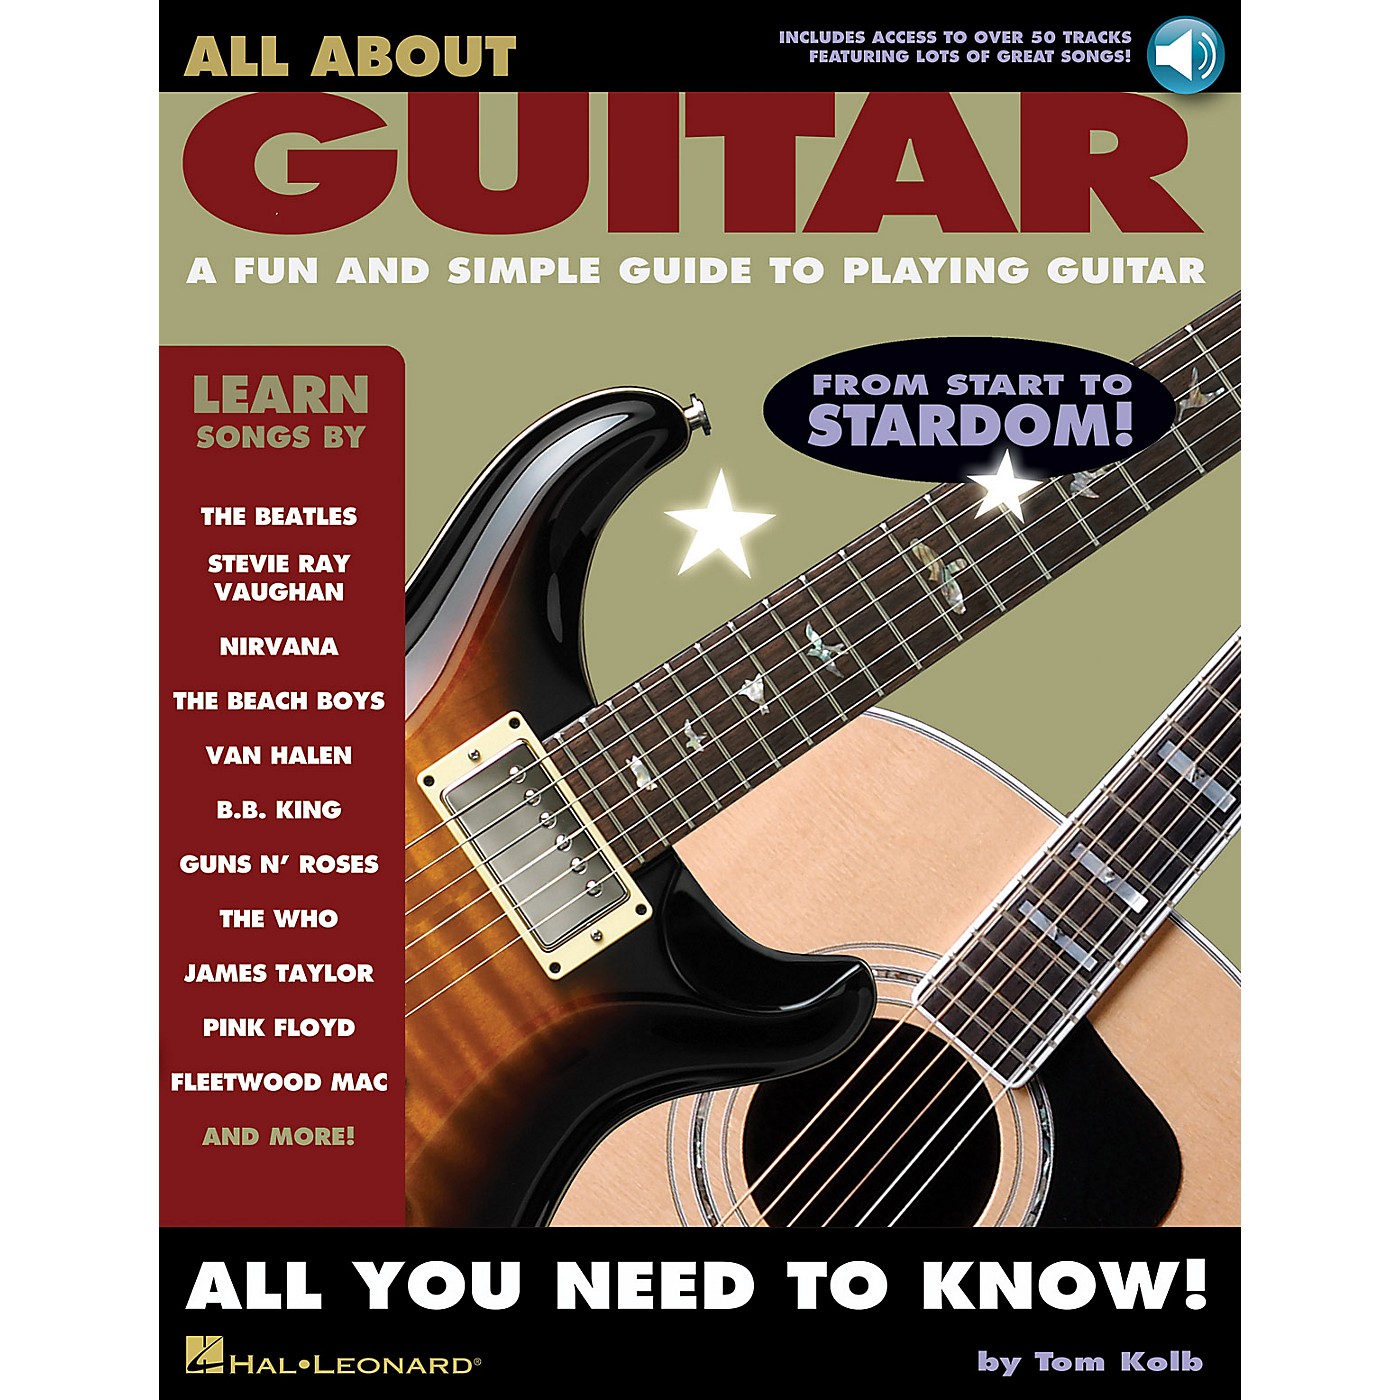 Hal Leonard All About Guitar Guitar Book Series Softcover with CD Written by Tom Kolb thumbnail